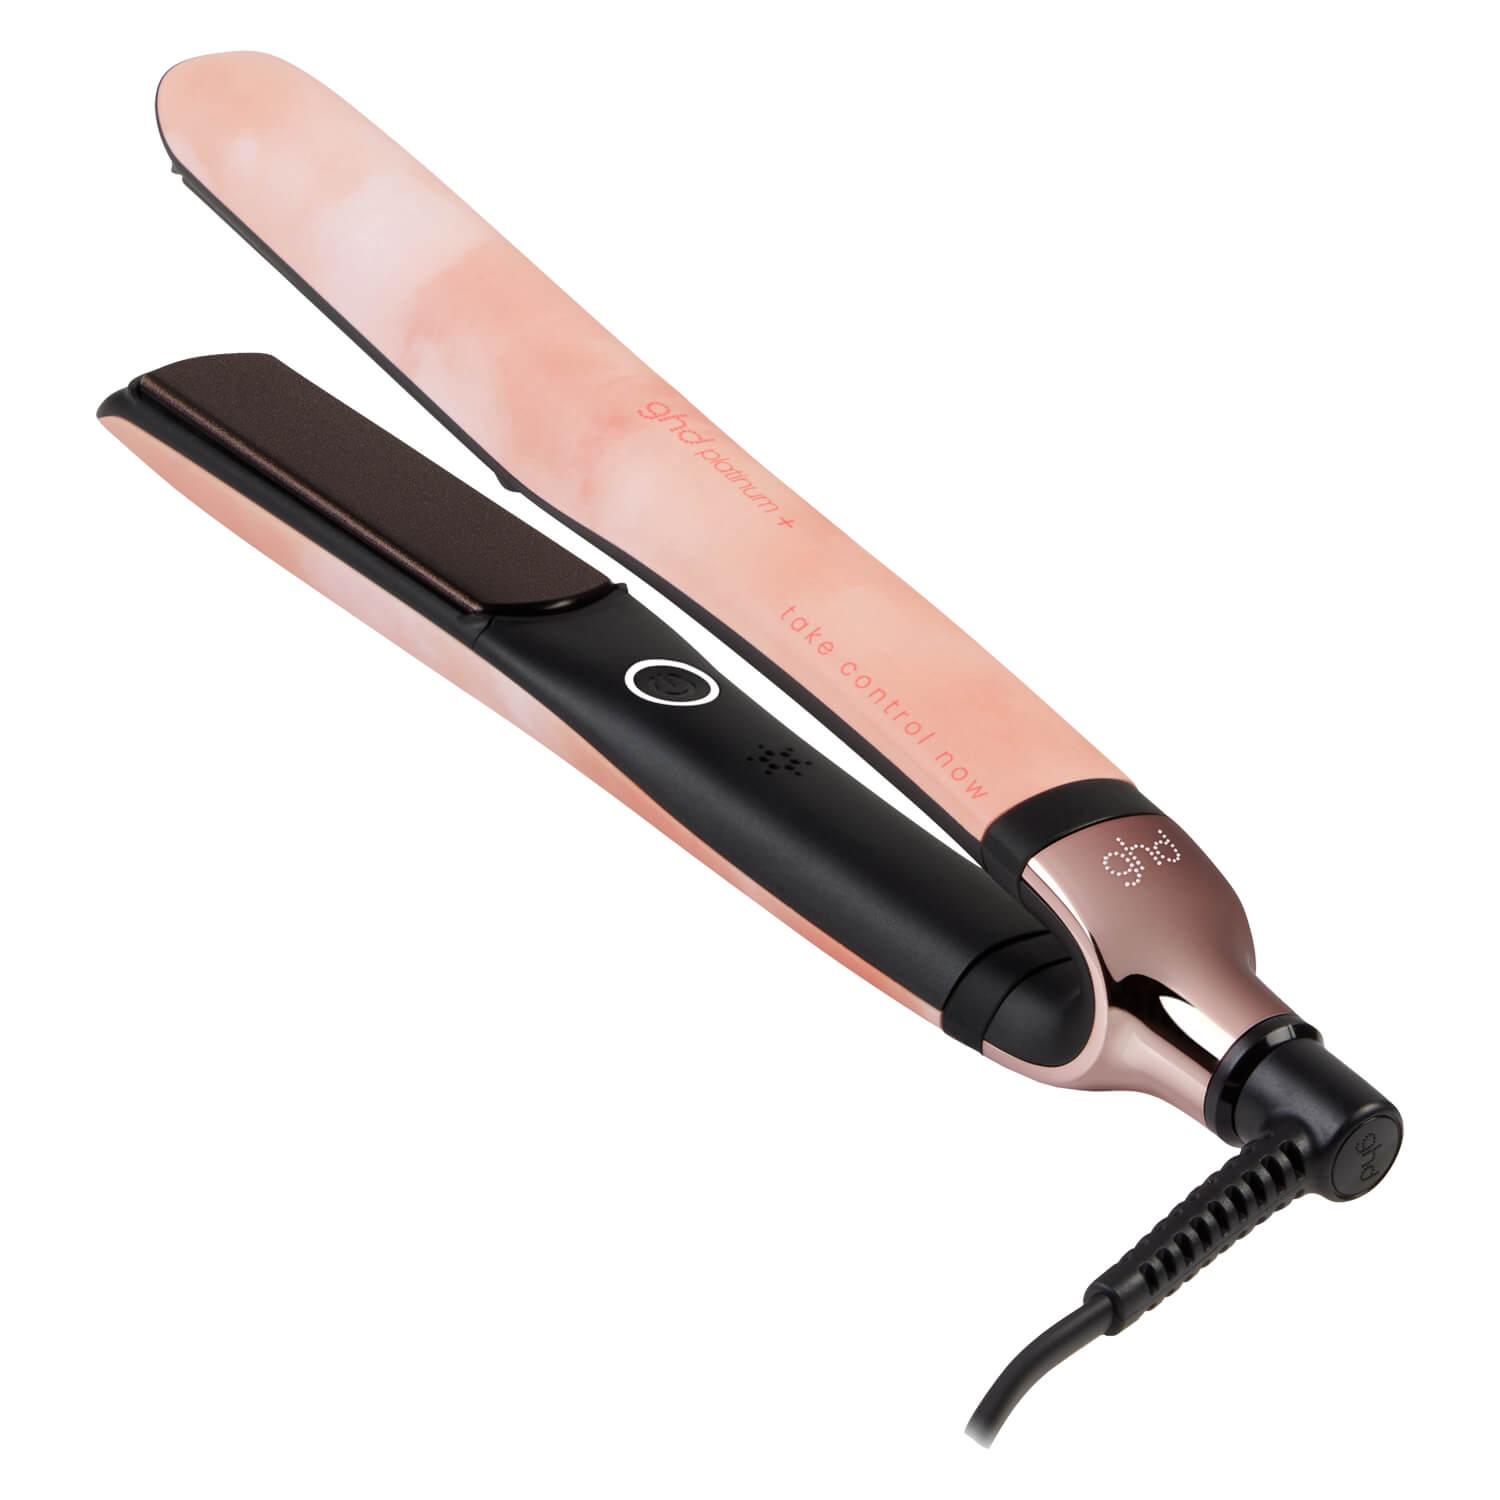 ghd Tools - Platinum+ Styler Pink Peach Charity Edition